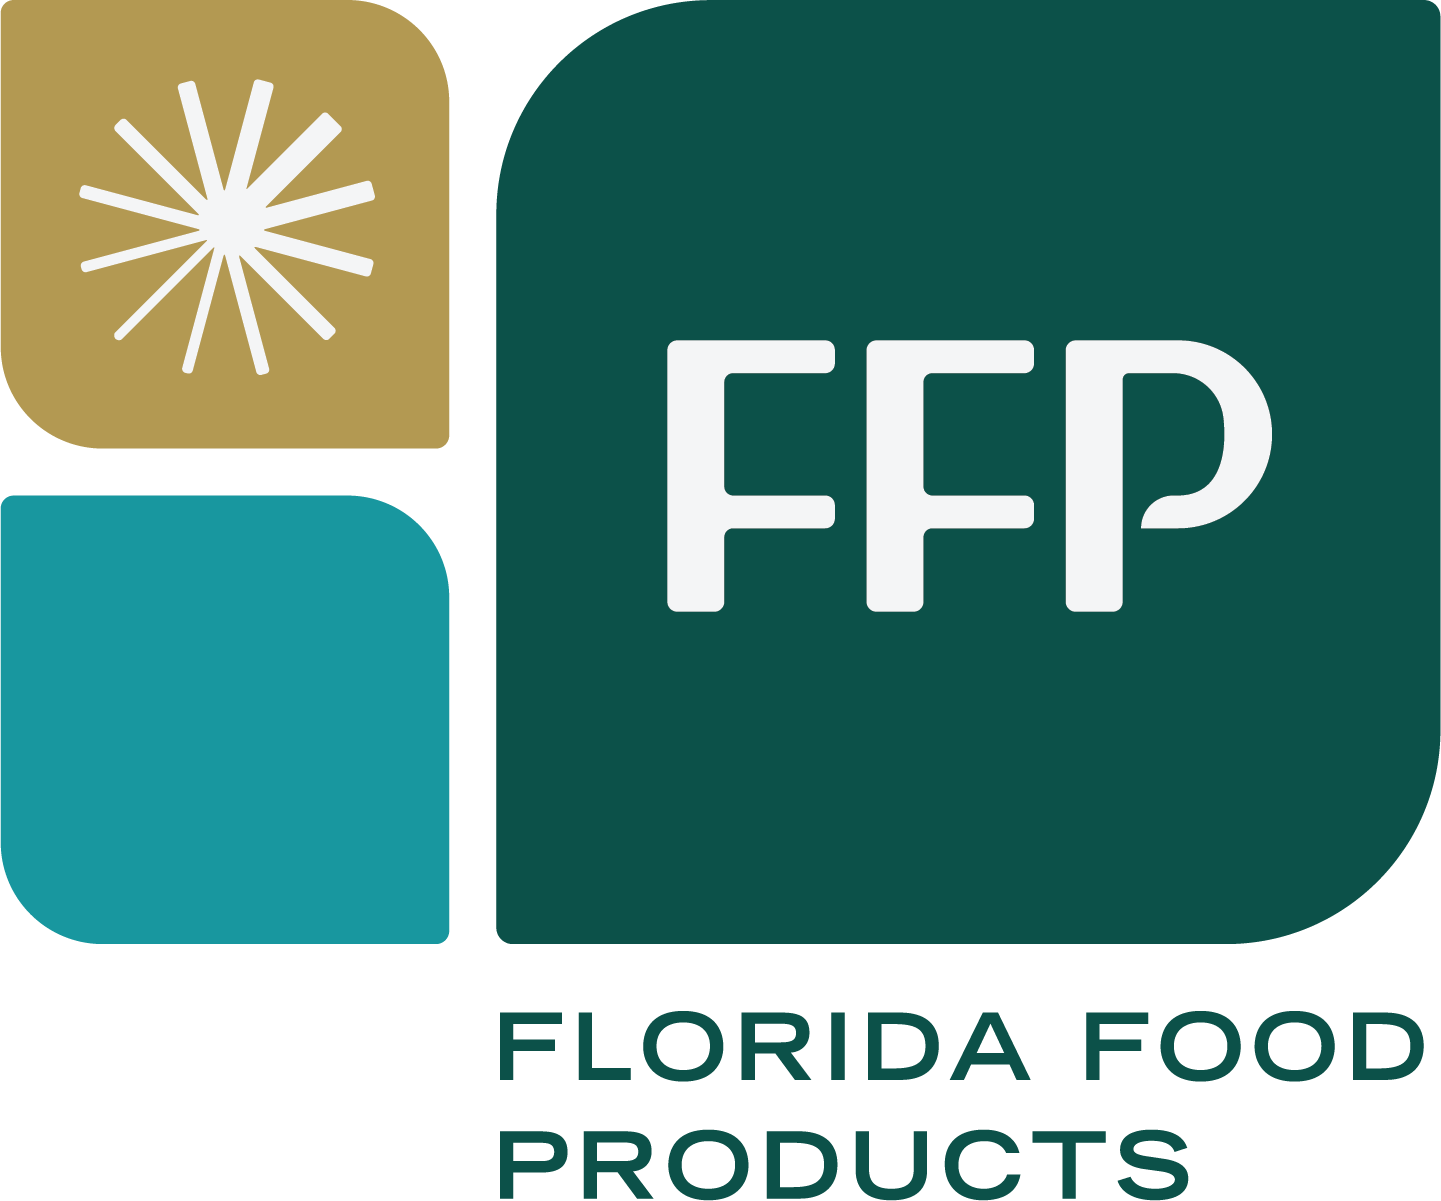 MidOcean Partners Acquires Florida Food Products, a Leading Manufacturer of Natural and Clean Label Ingredients